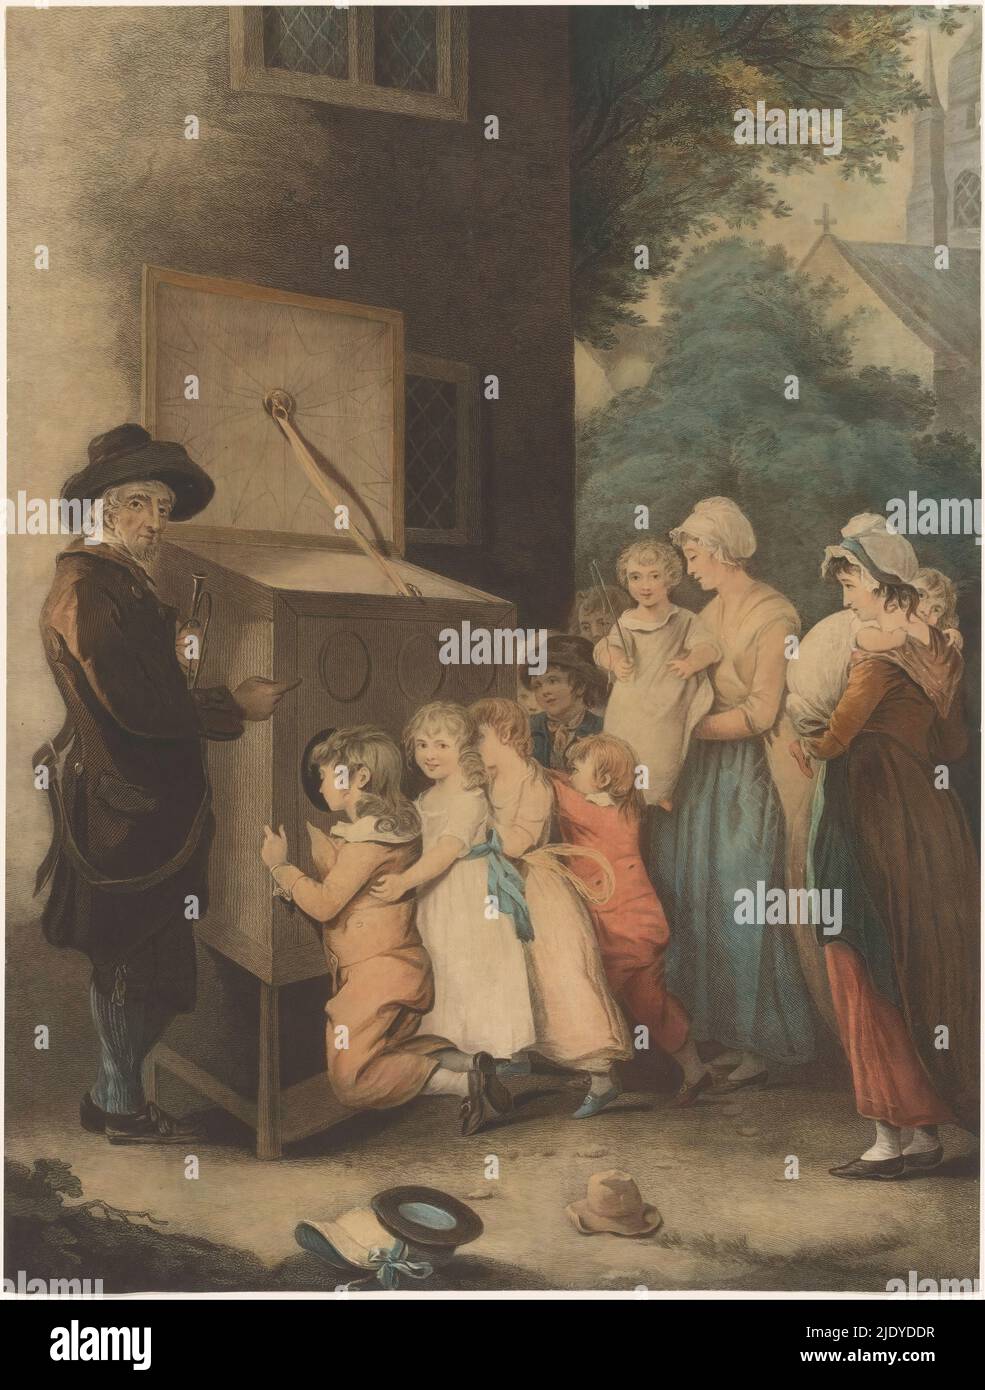 Children around a viewing box, The Show Man / La Piece Curieuse, In a village square, boys and girls line up in front of a viewing box. Next to the cabinet is the owner, a man wearing a hat and holding a trumpet. On the right, two women with children on their arms. In the background a church., print maker: Thomas Gaugain, after painting by: Joseph Barney, publisher: S. Morgan, London, 1802, paper, etching, engraving, height 600 mm × width 455 mm Stock Photo